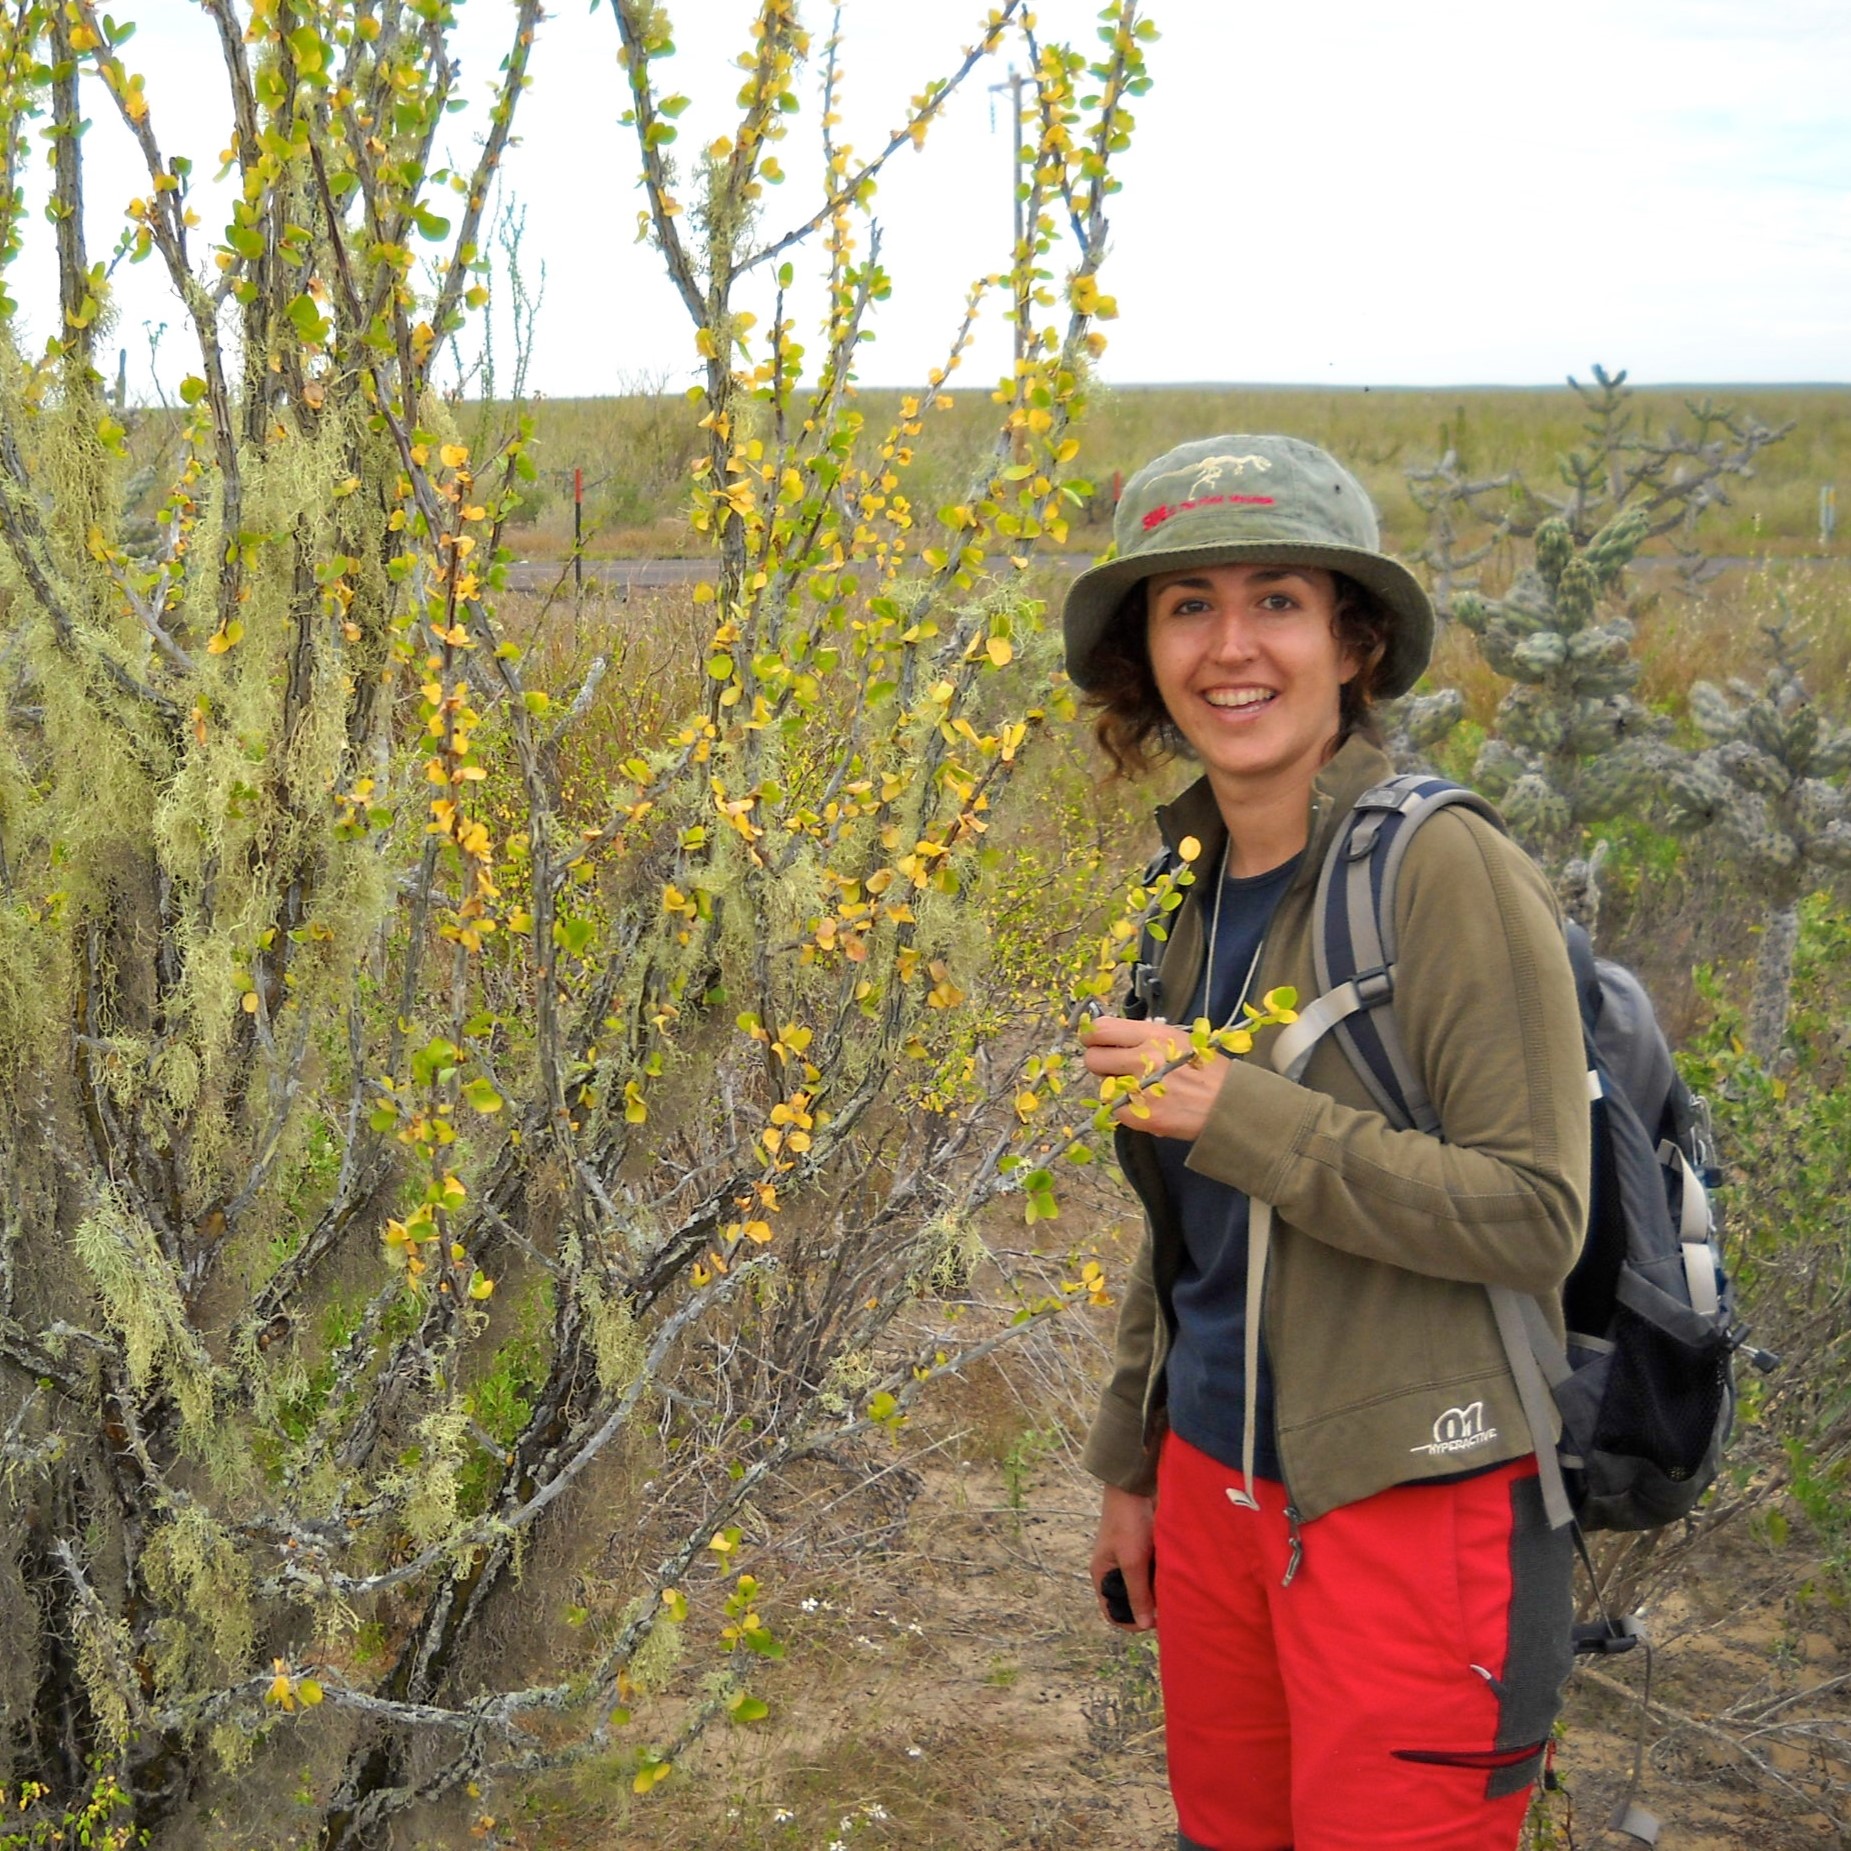 A researcher poses for a photo by a lichen covered plant among a grassy landscape